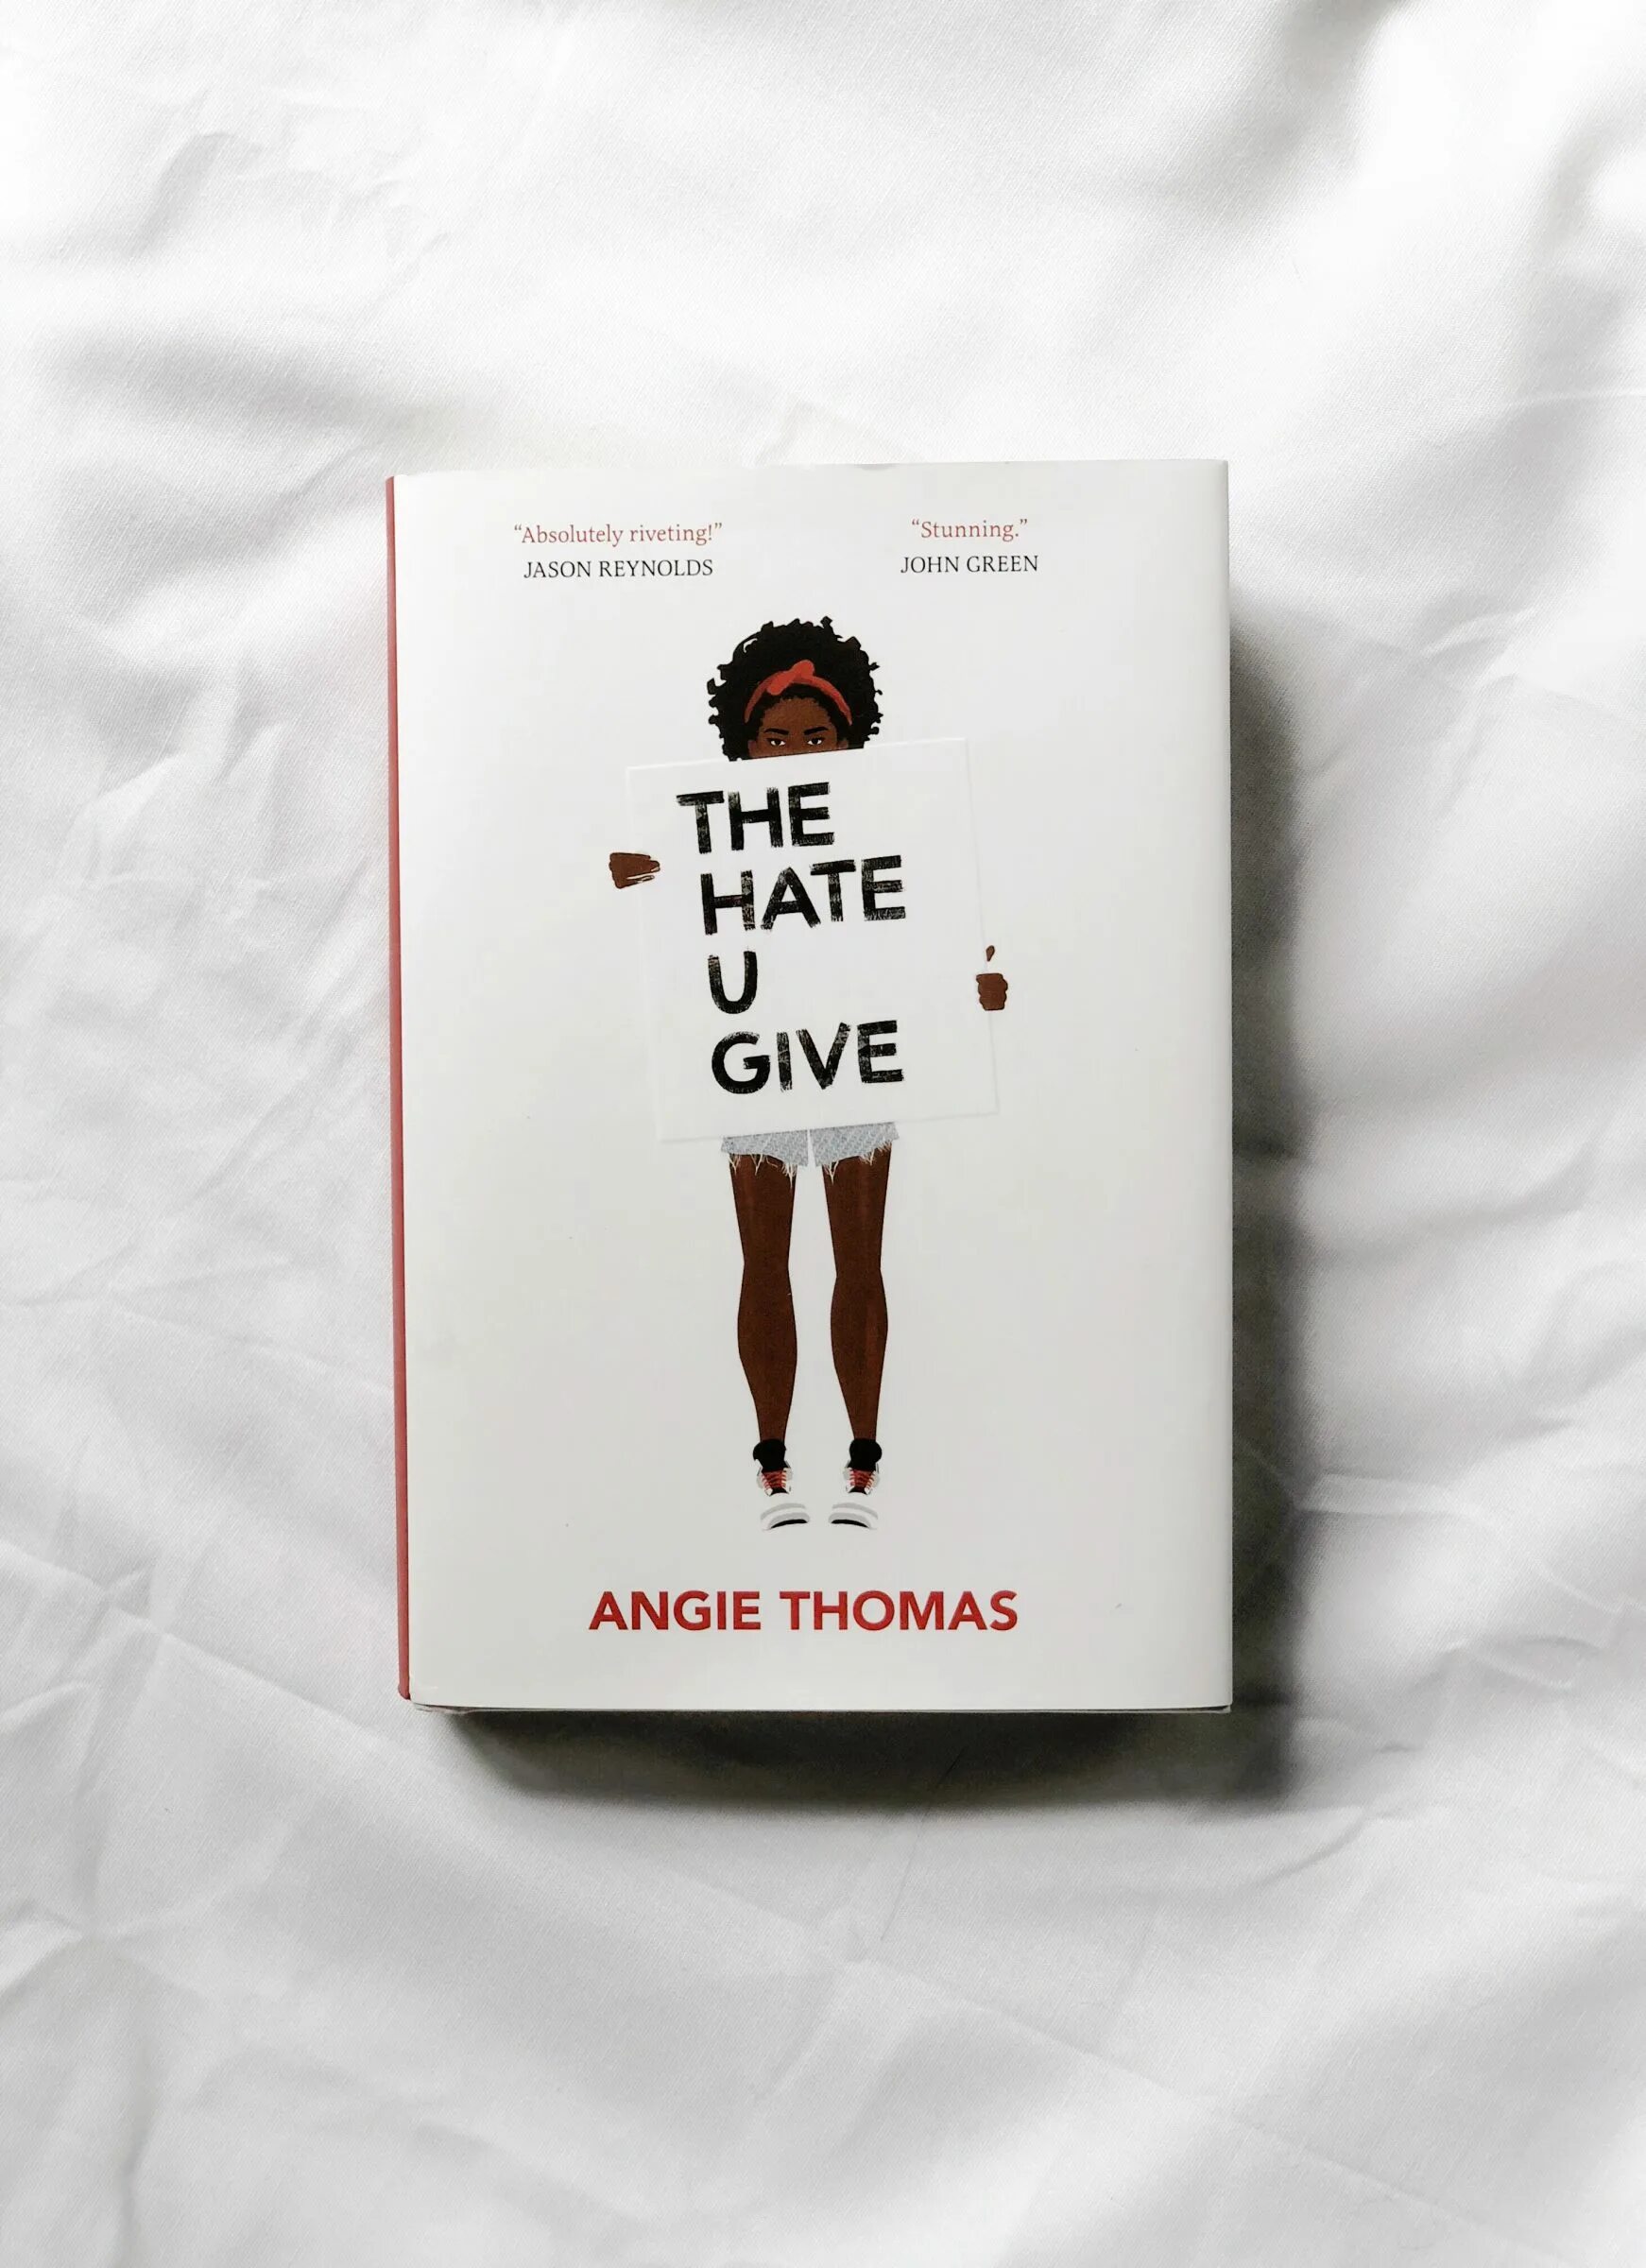 1 give him this book. The hate you give. The hate u give book. Give a book. Thomas Angie "hate u give".